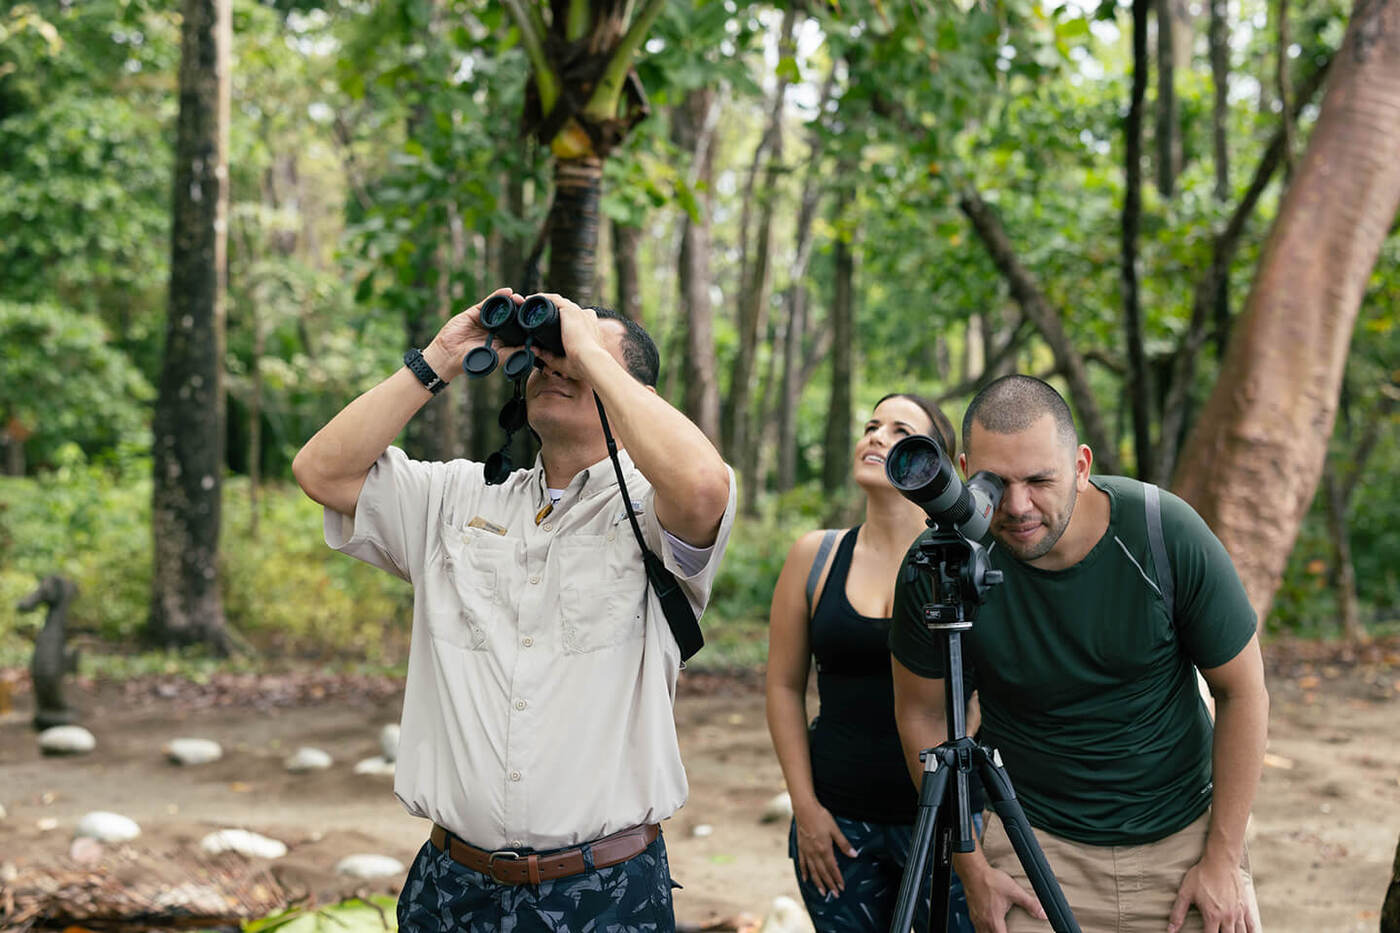 Group of people viewing through binoculars in forest